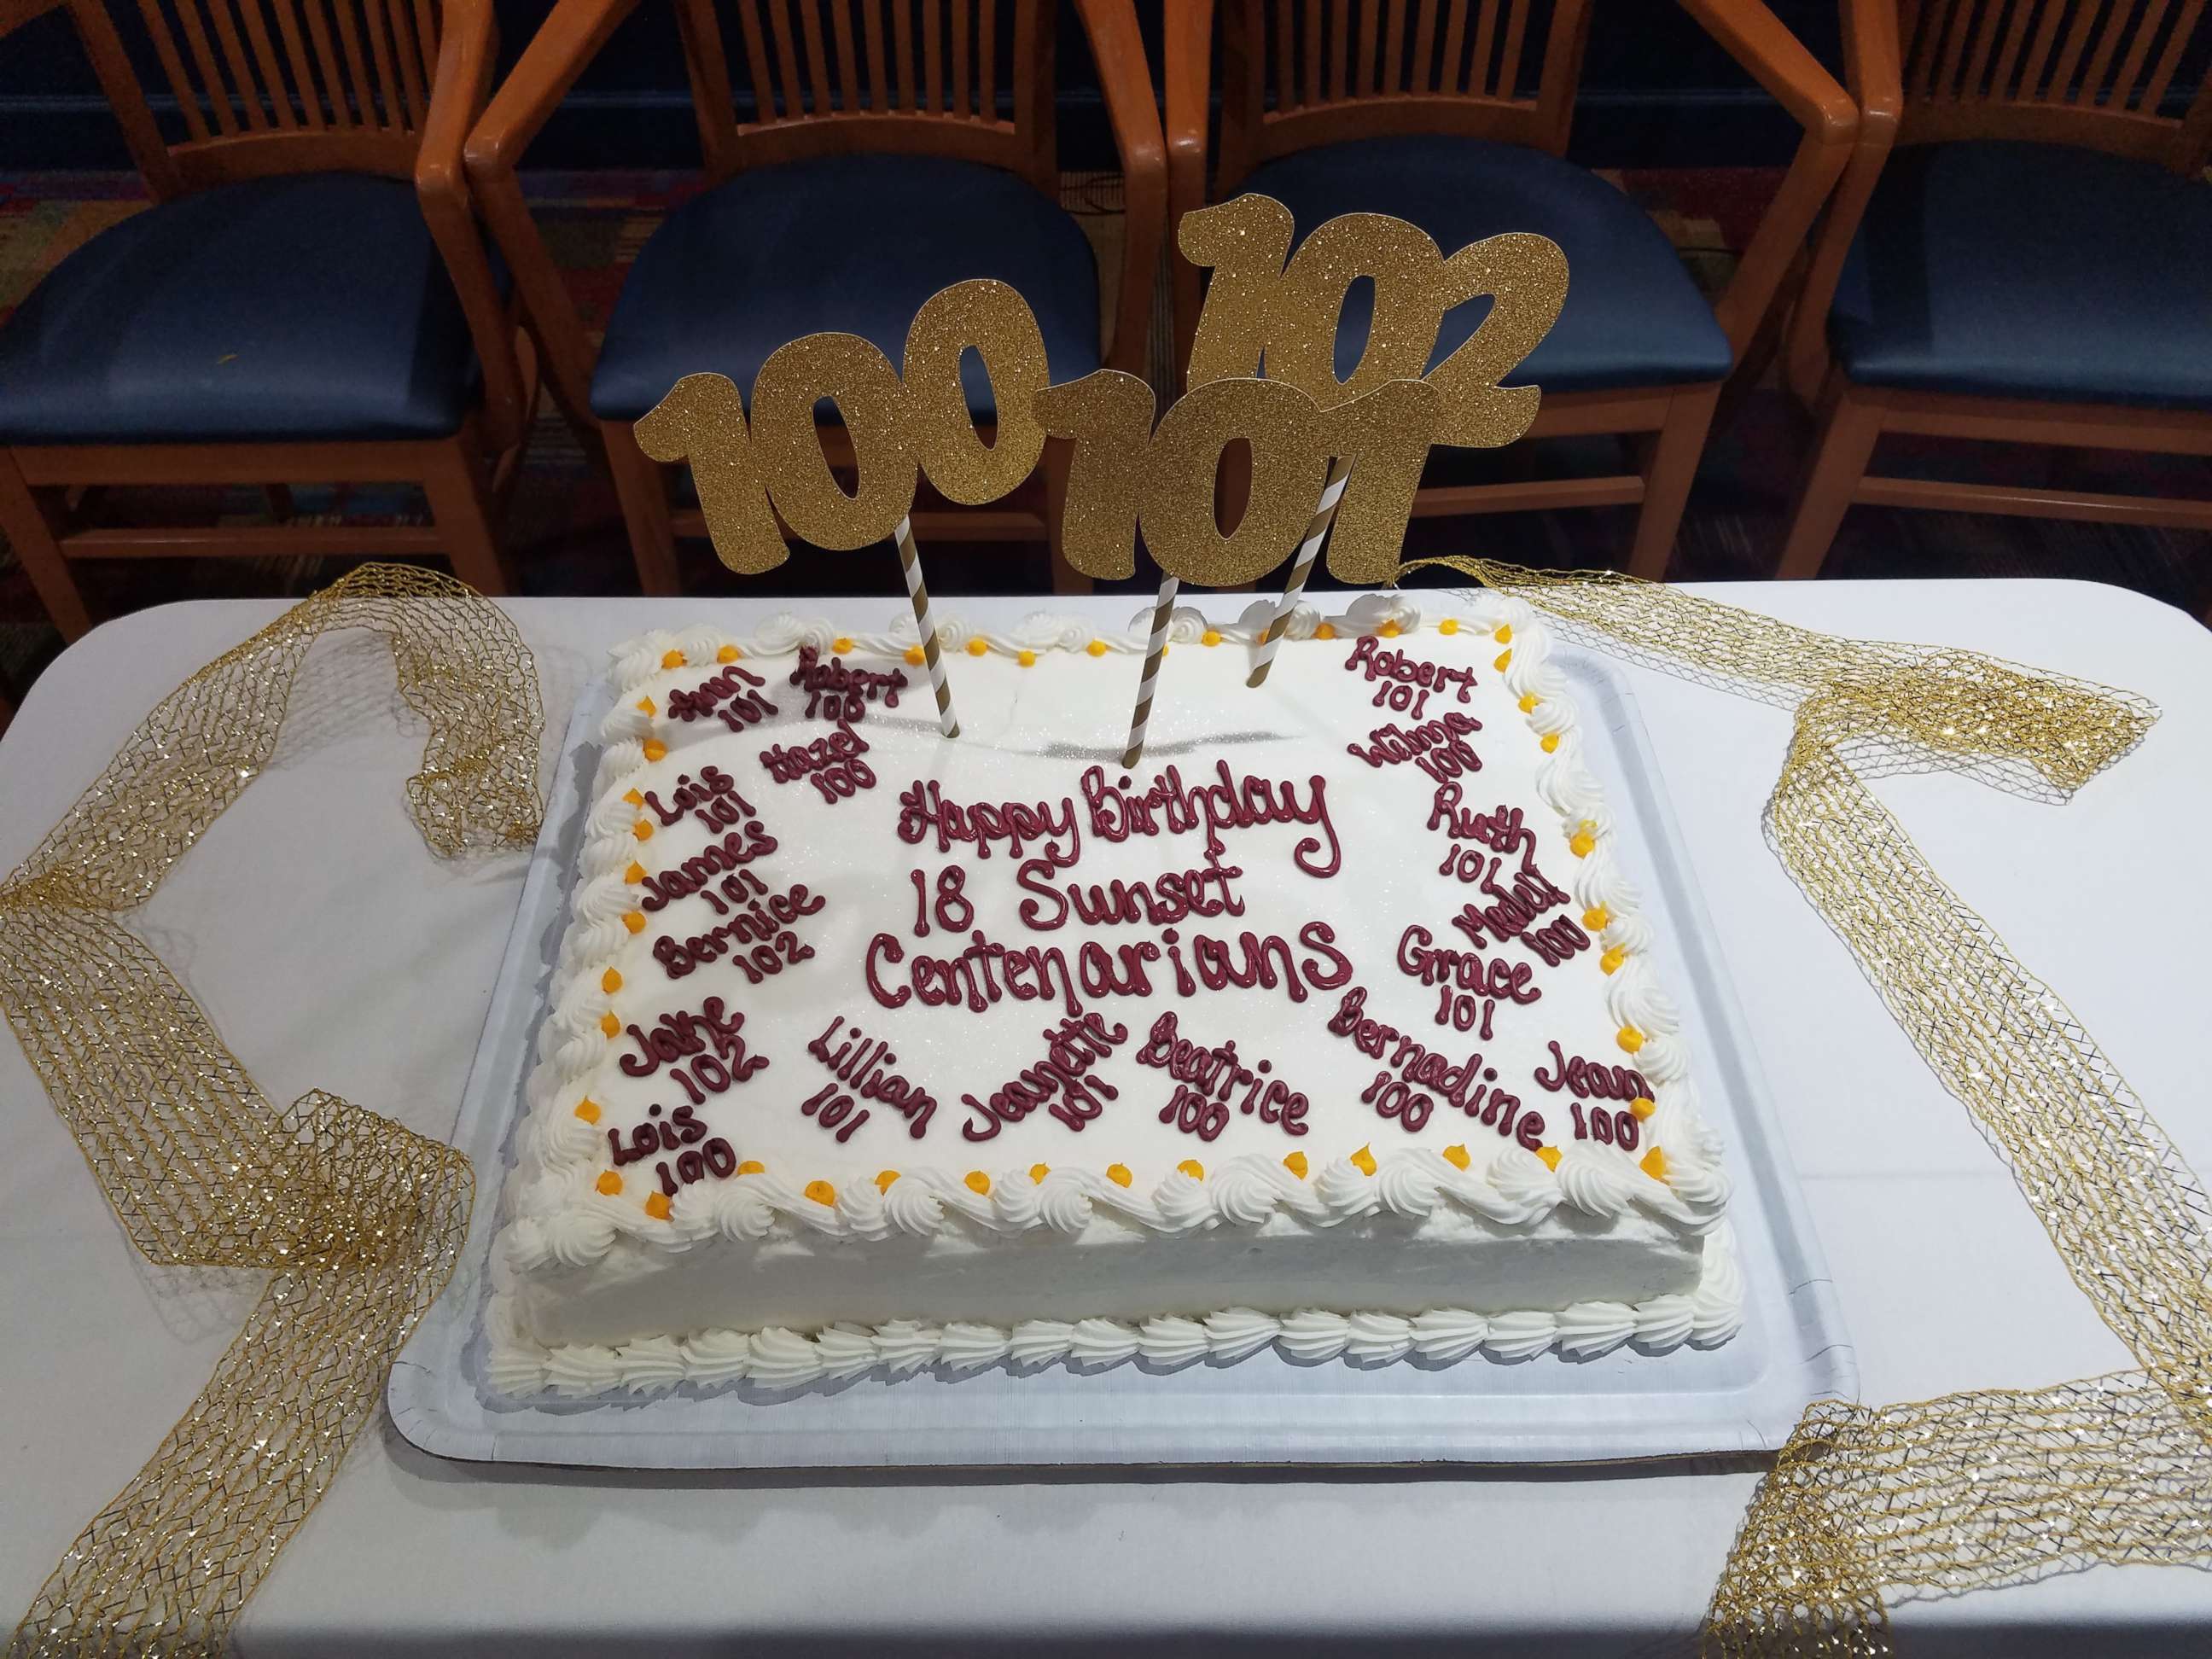 PHOTO: The birthday cake for 18 centenarians at the Sunset Retirement Community.